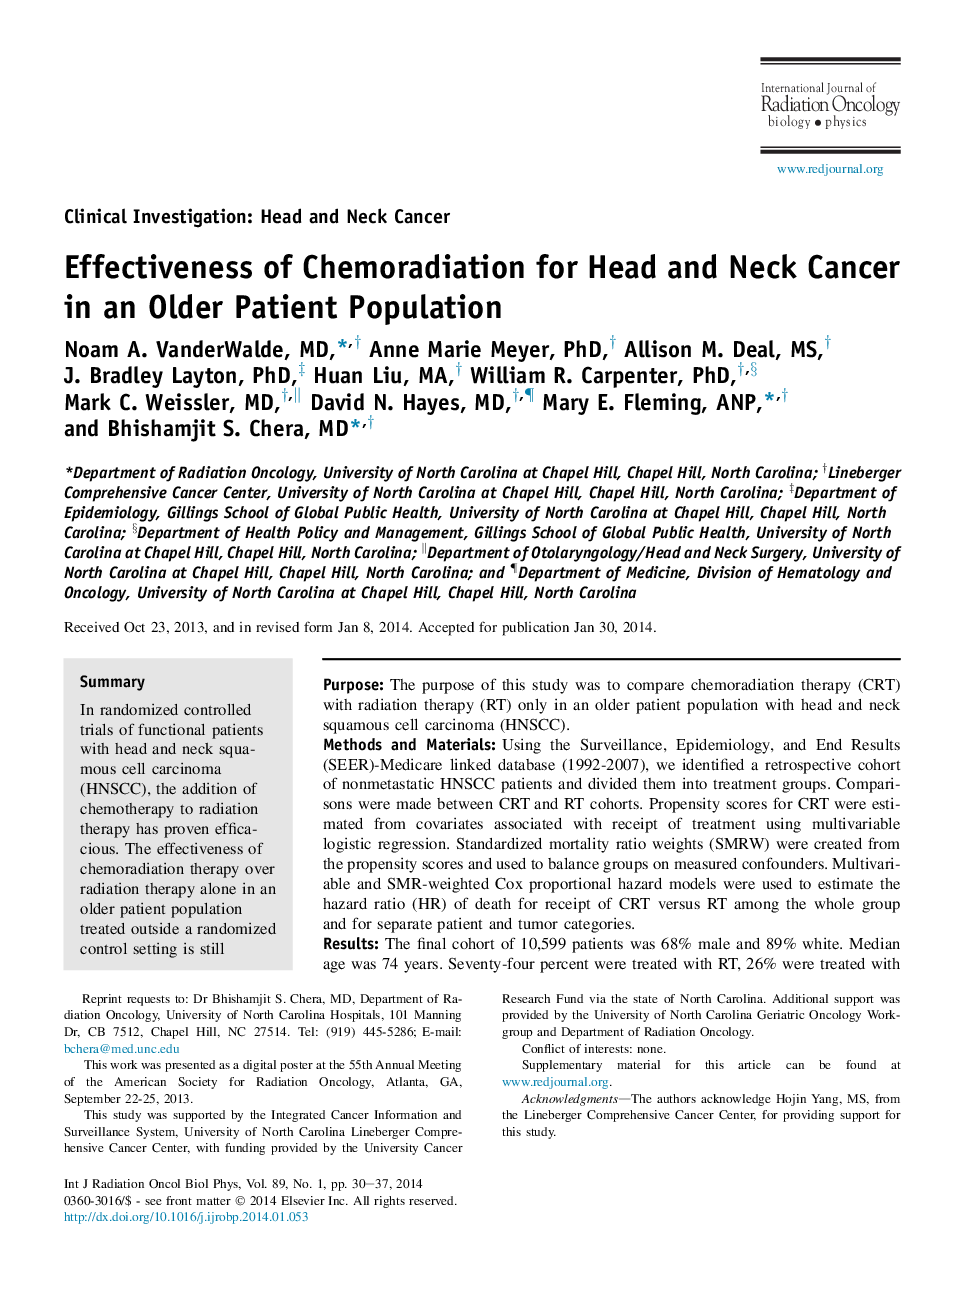 Effectiveness of Chemoradiation for Head and Neck Cancer in an Older Patient Population